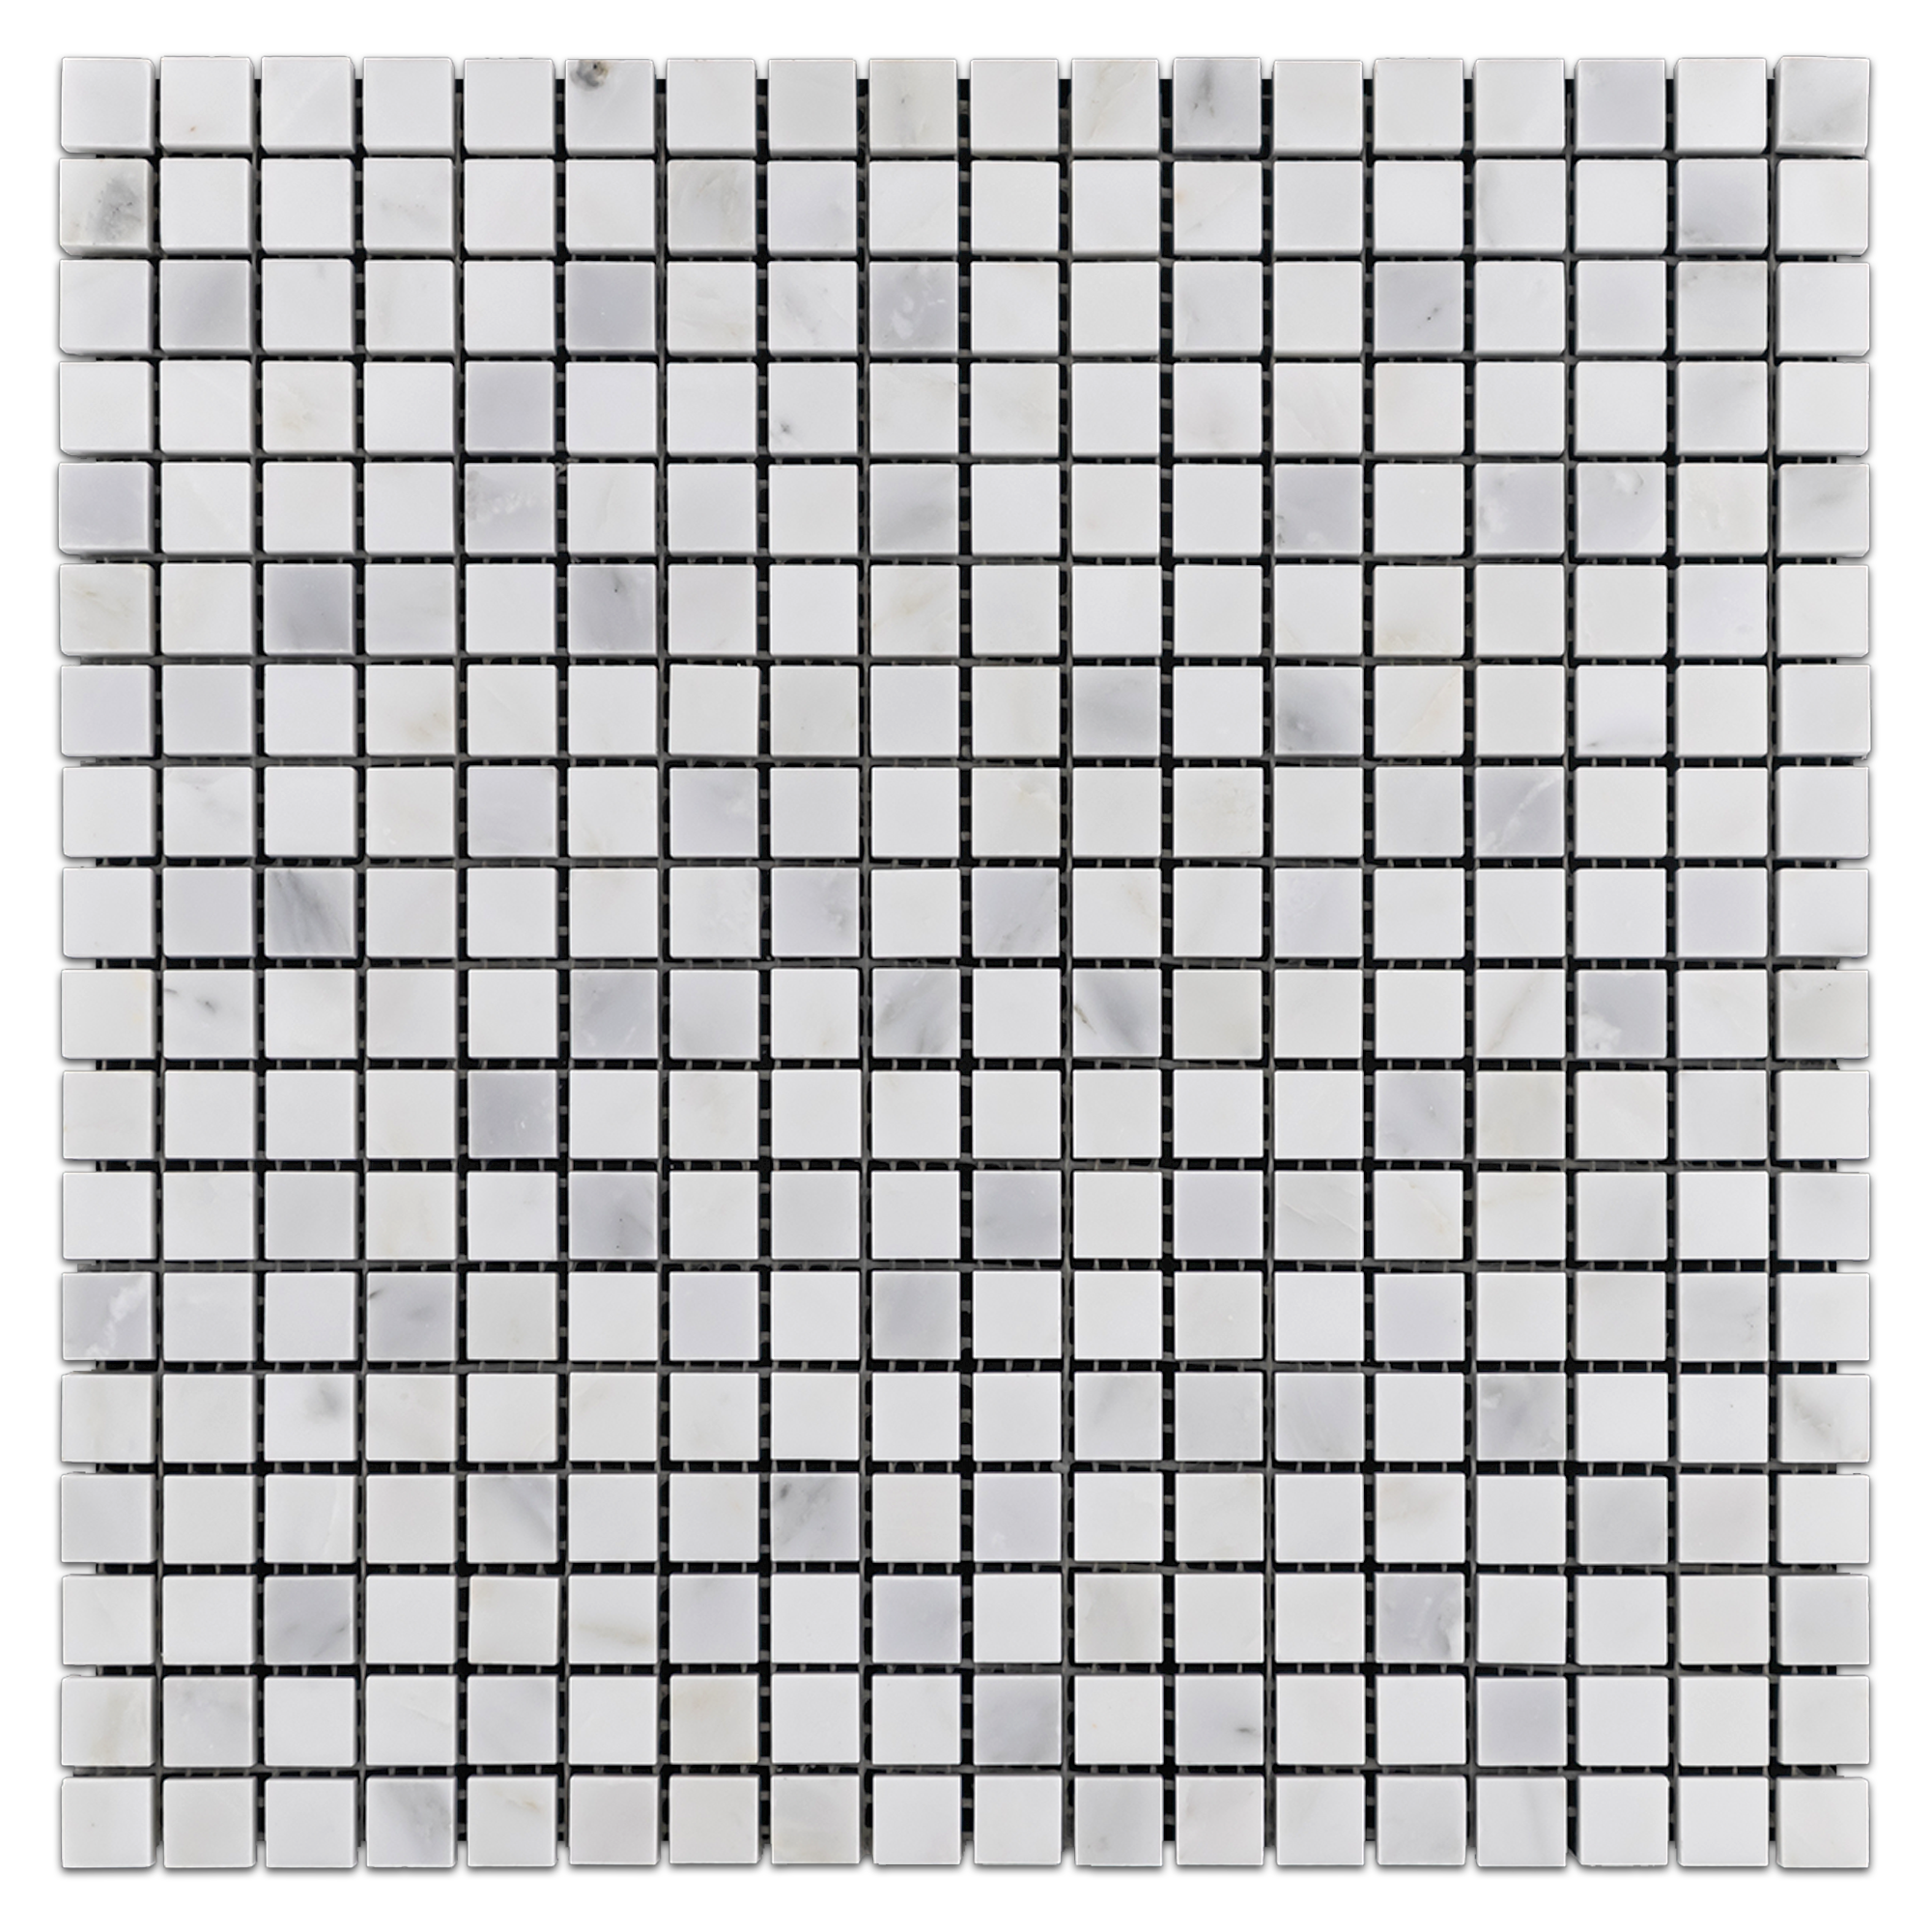 Elon Pearl White Marble 0.625x0.625 Straight Stack Field Mosaic 12x12x0.375 Polished - Surface Group International Product